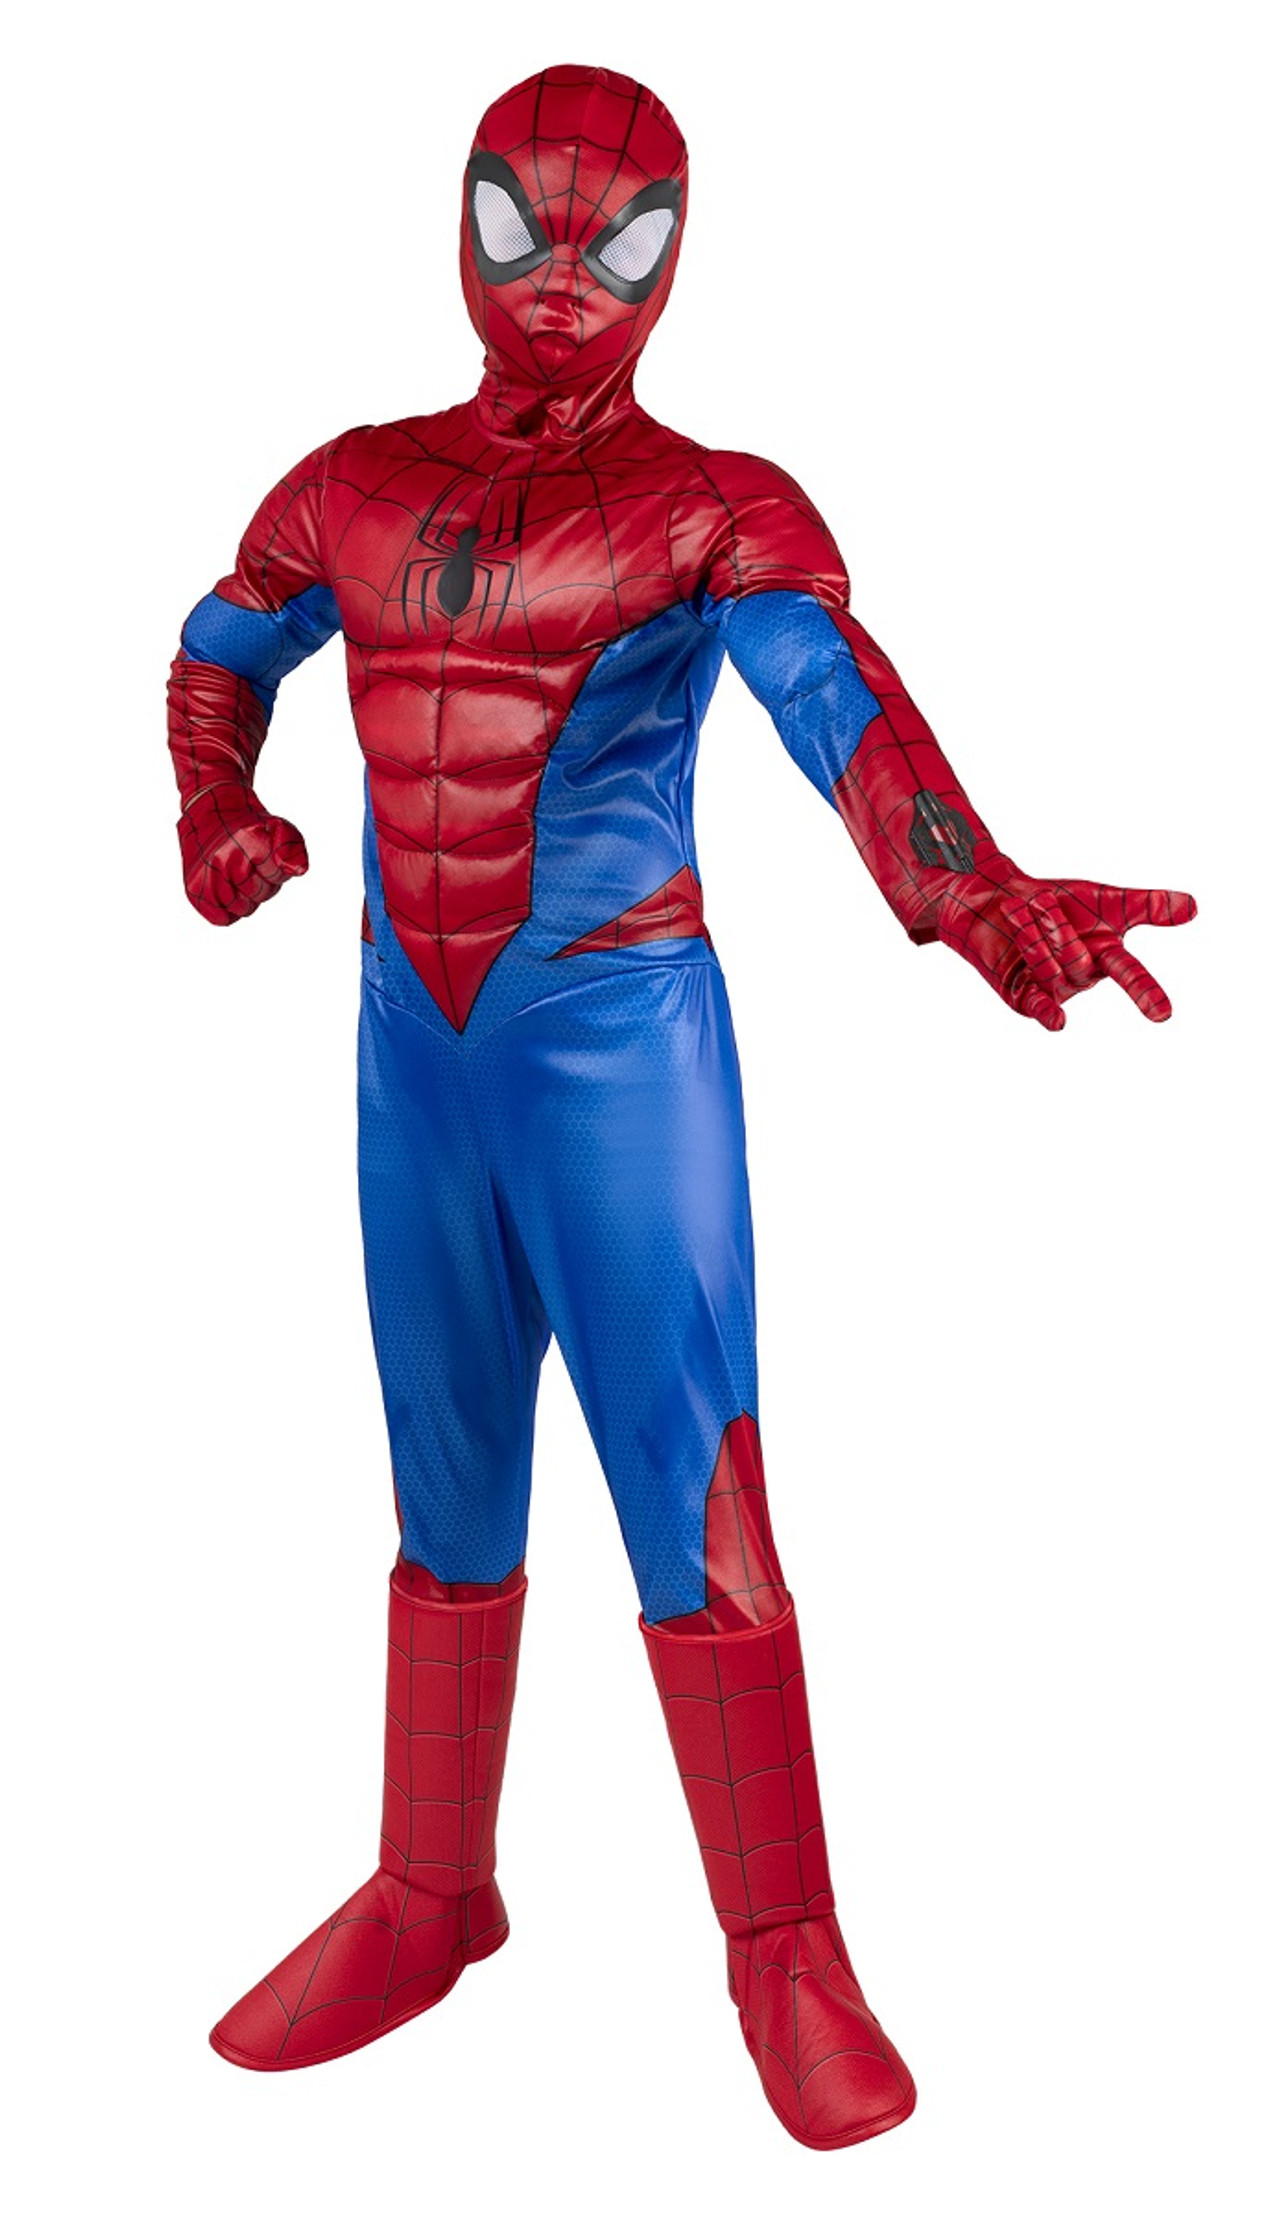 Spider Man Costume | Canada's Best Spiderman Suits for kids and adults